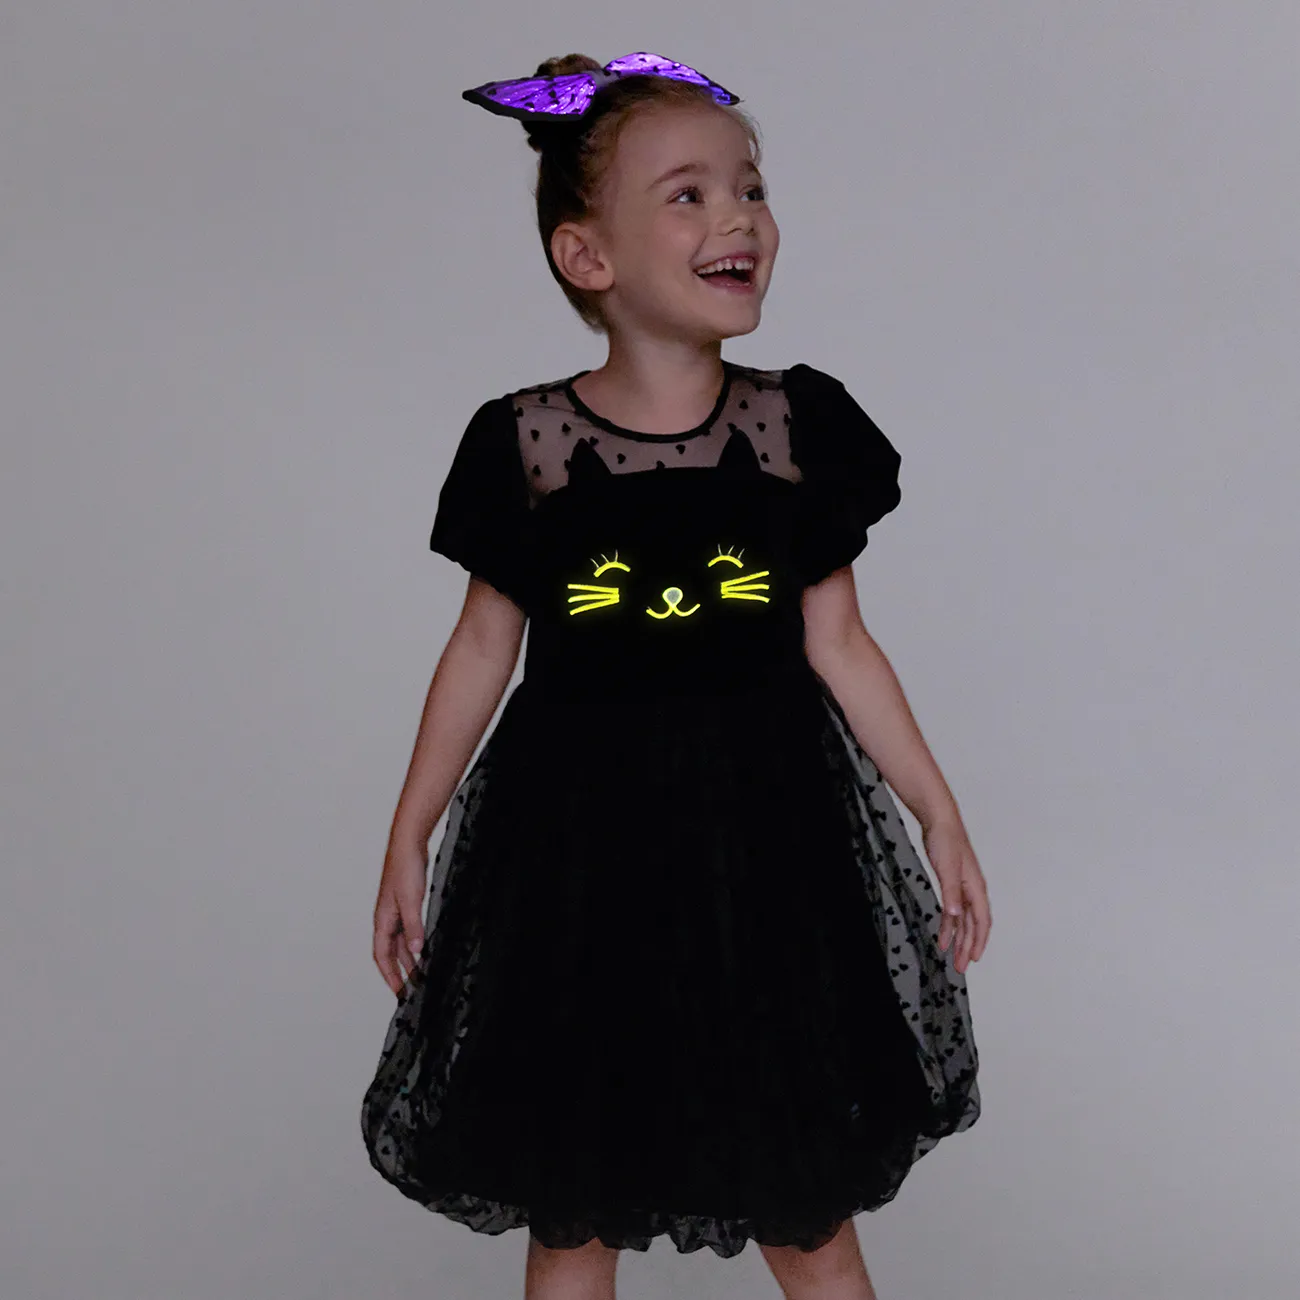 Go-Glow Illuminating Toddler Dress with Light Up Cat Pattern Including Controller (Battery Inside) Black big image 1